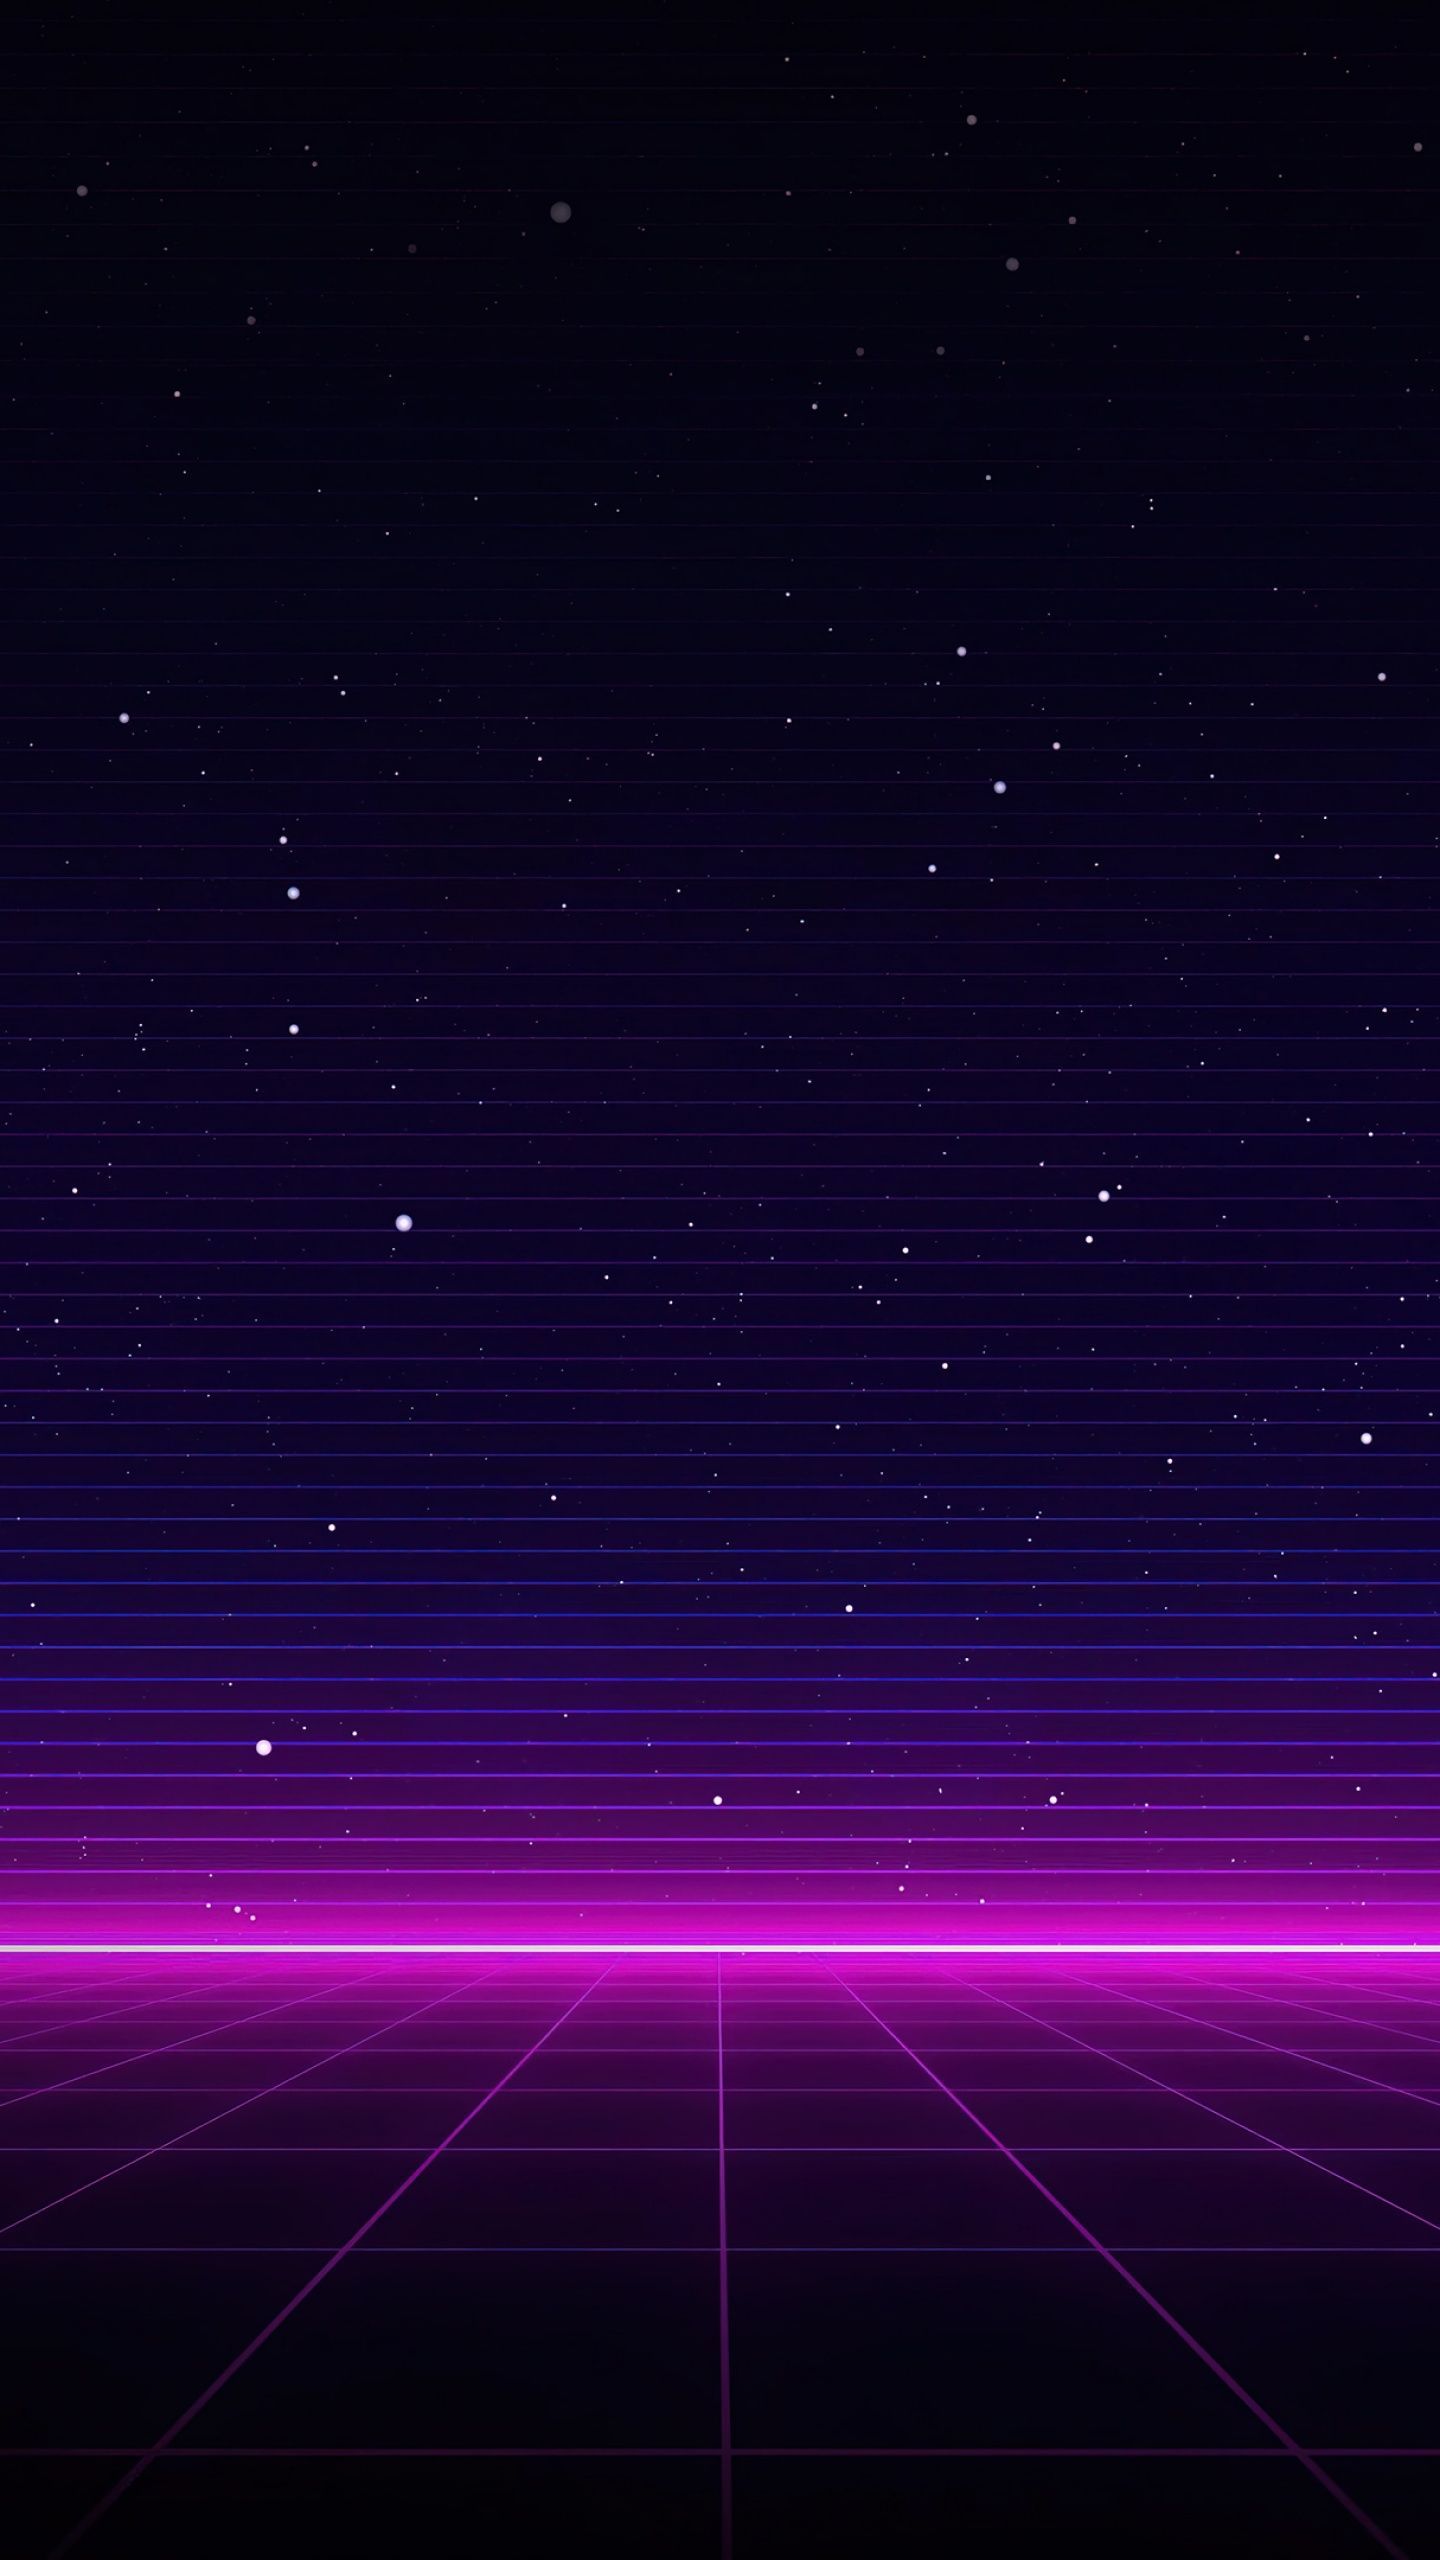 Aesthetic neon purple and pink wallpaper for your phone - Dark purple, neon purple, cute purple